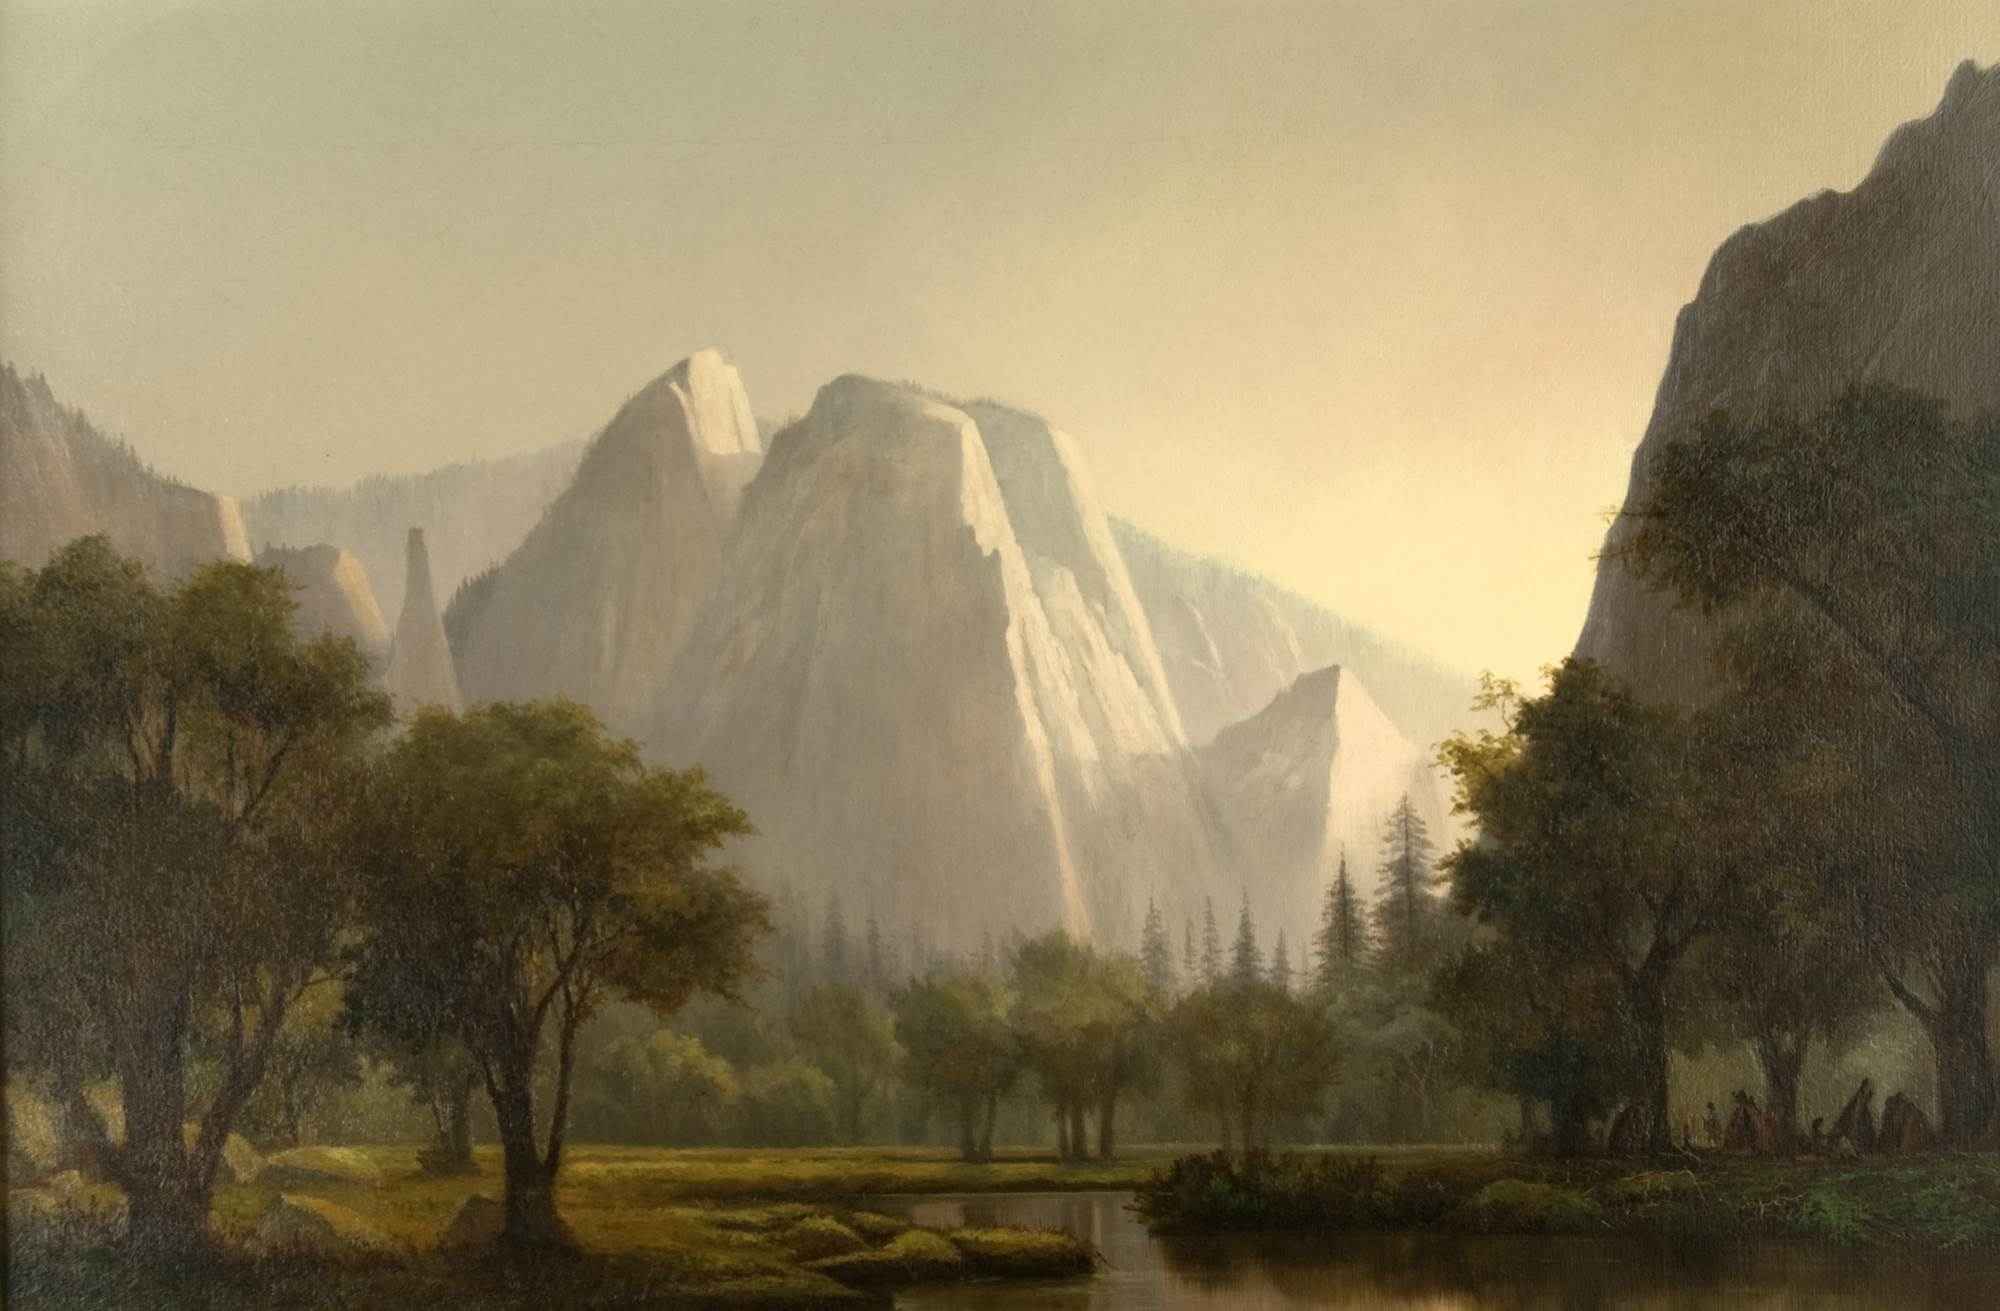 Painting Yosemite, Cathedral Rocks from the Valley